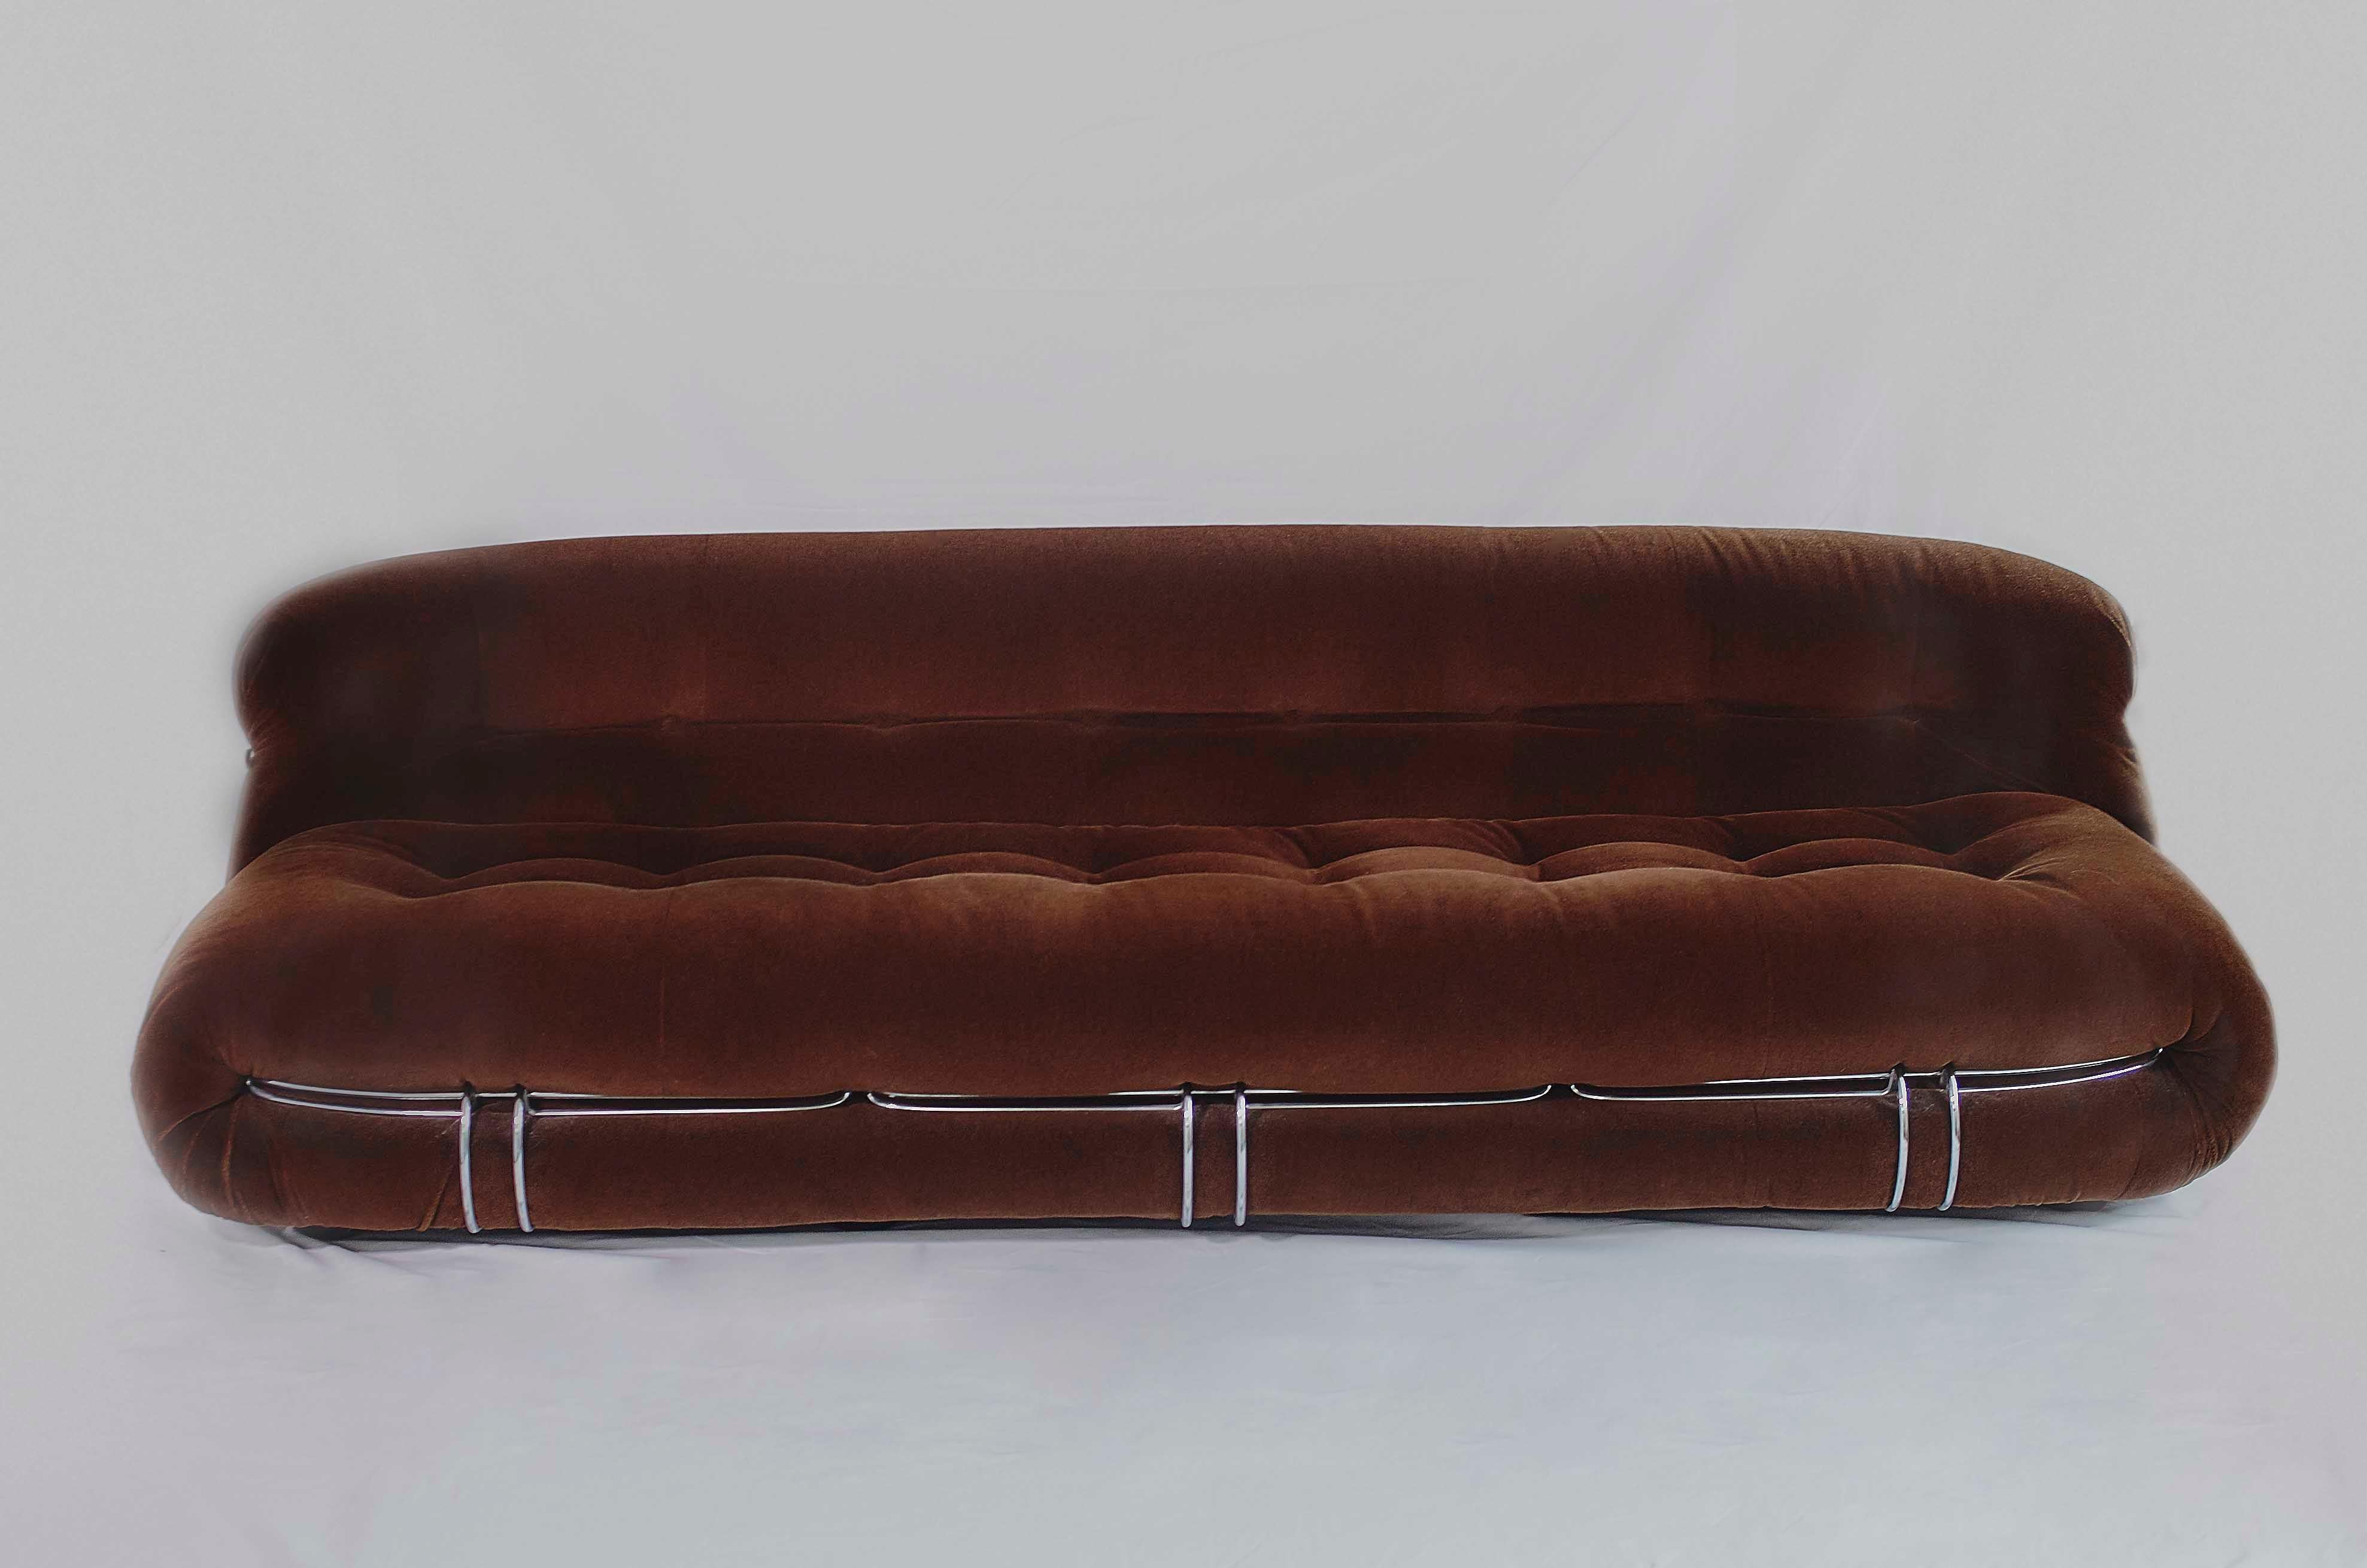 Soriana sofa design by Afra & Tobia Scarpa for Cassina 1970s.
This model has three front metal clamps, and his original brown velvet fabric.
Iconic Italian design piece, winner of the Compasso D'Oro in 1969.
The design idea of the Soriana was to